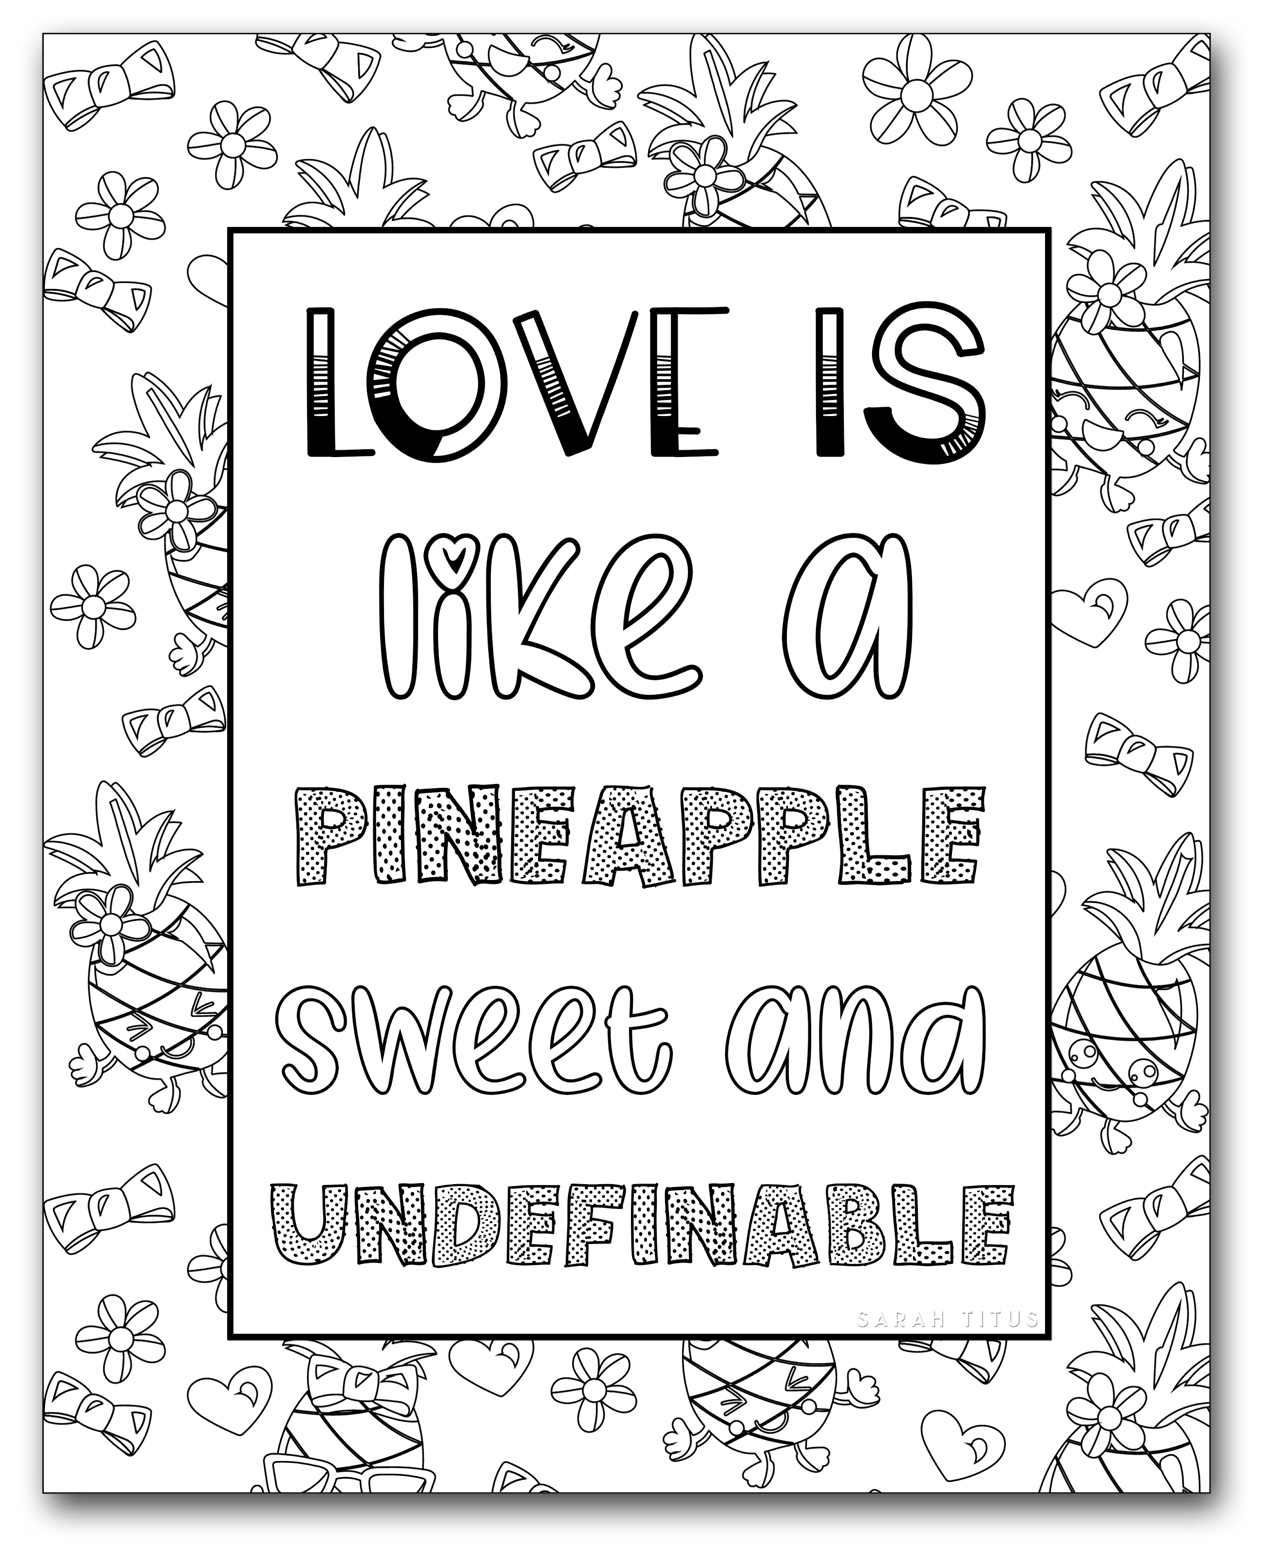 Free Printable Coloring Pages for Teens